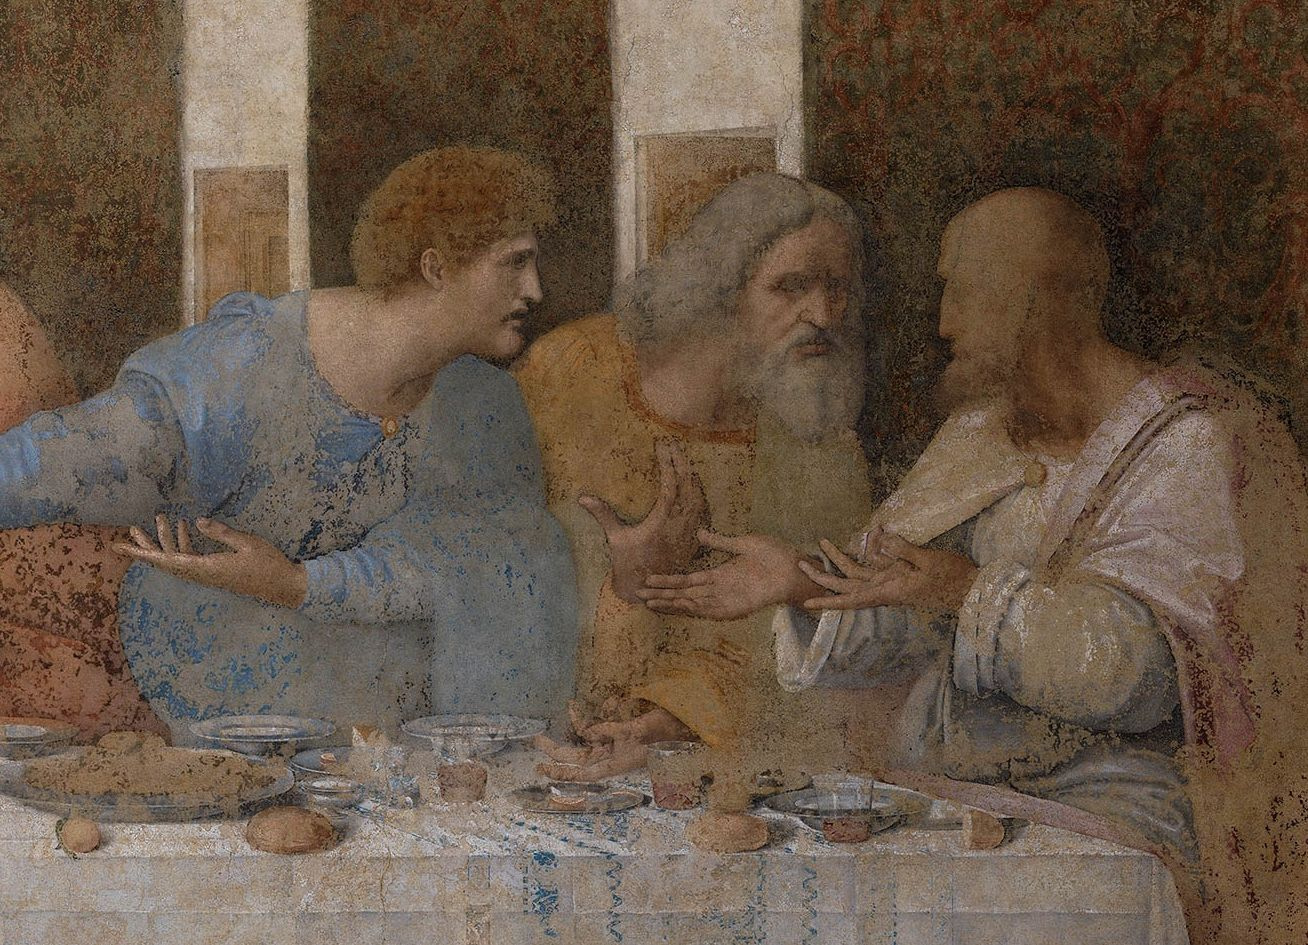 What is actually depicted on The Last Supper by Leonardo da Vinci?